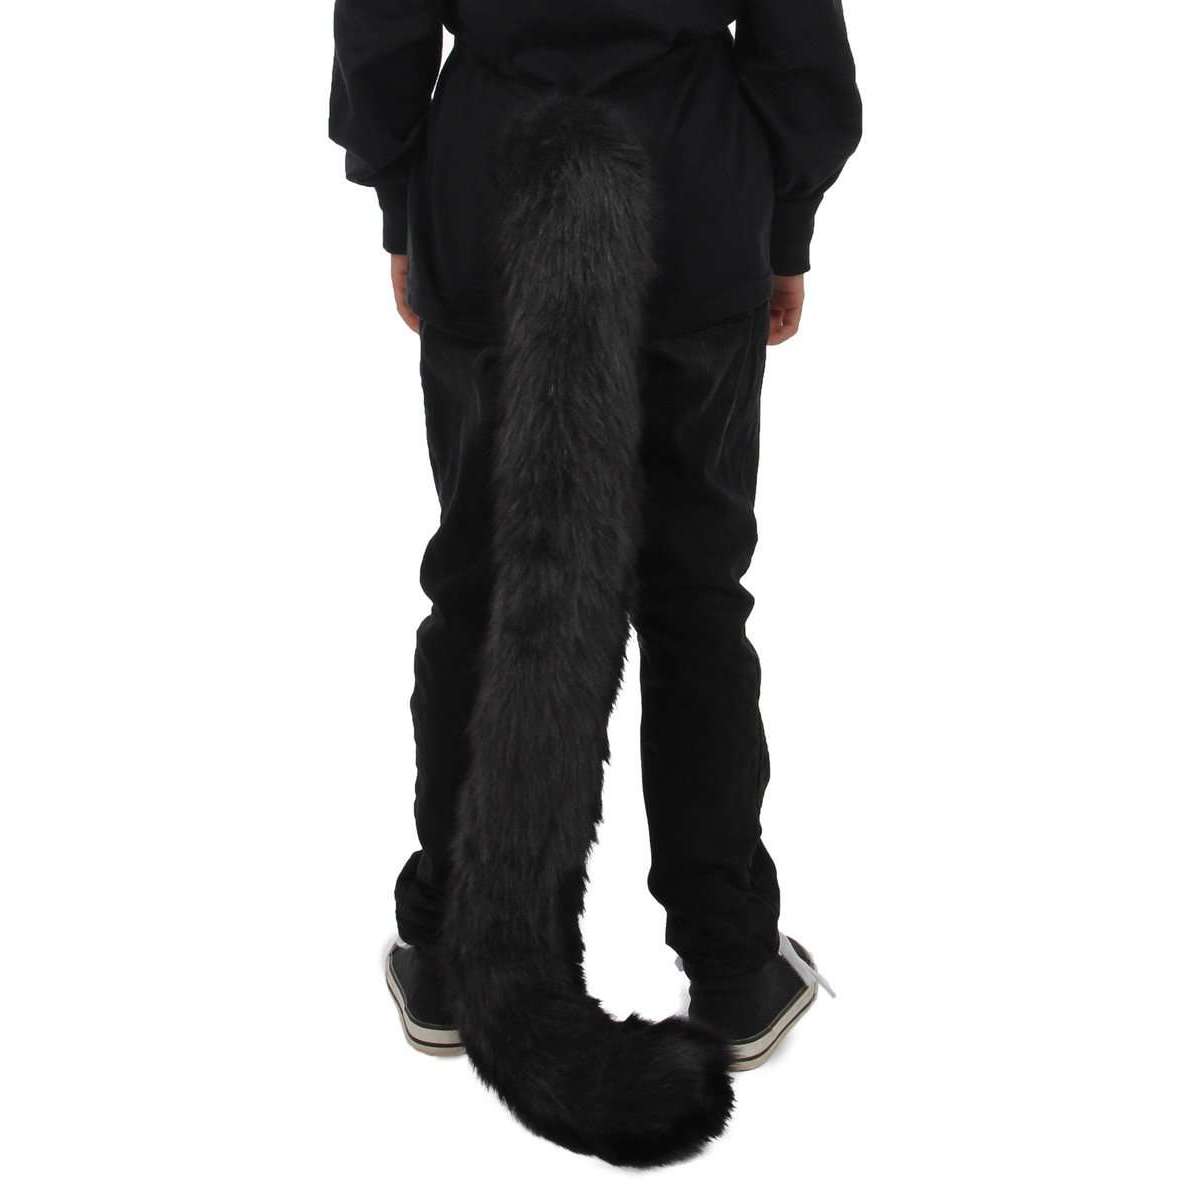 Deluxe Oversized Black Kitty Tail